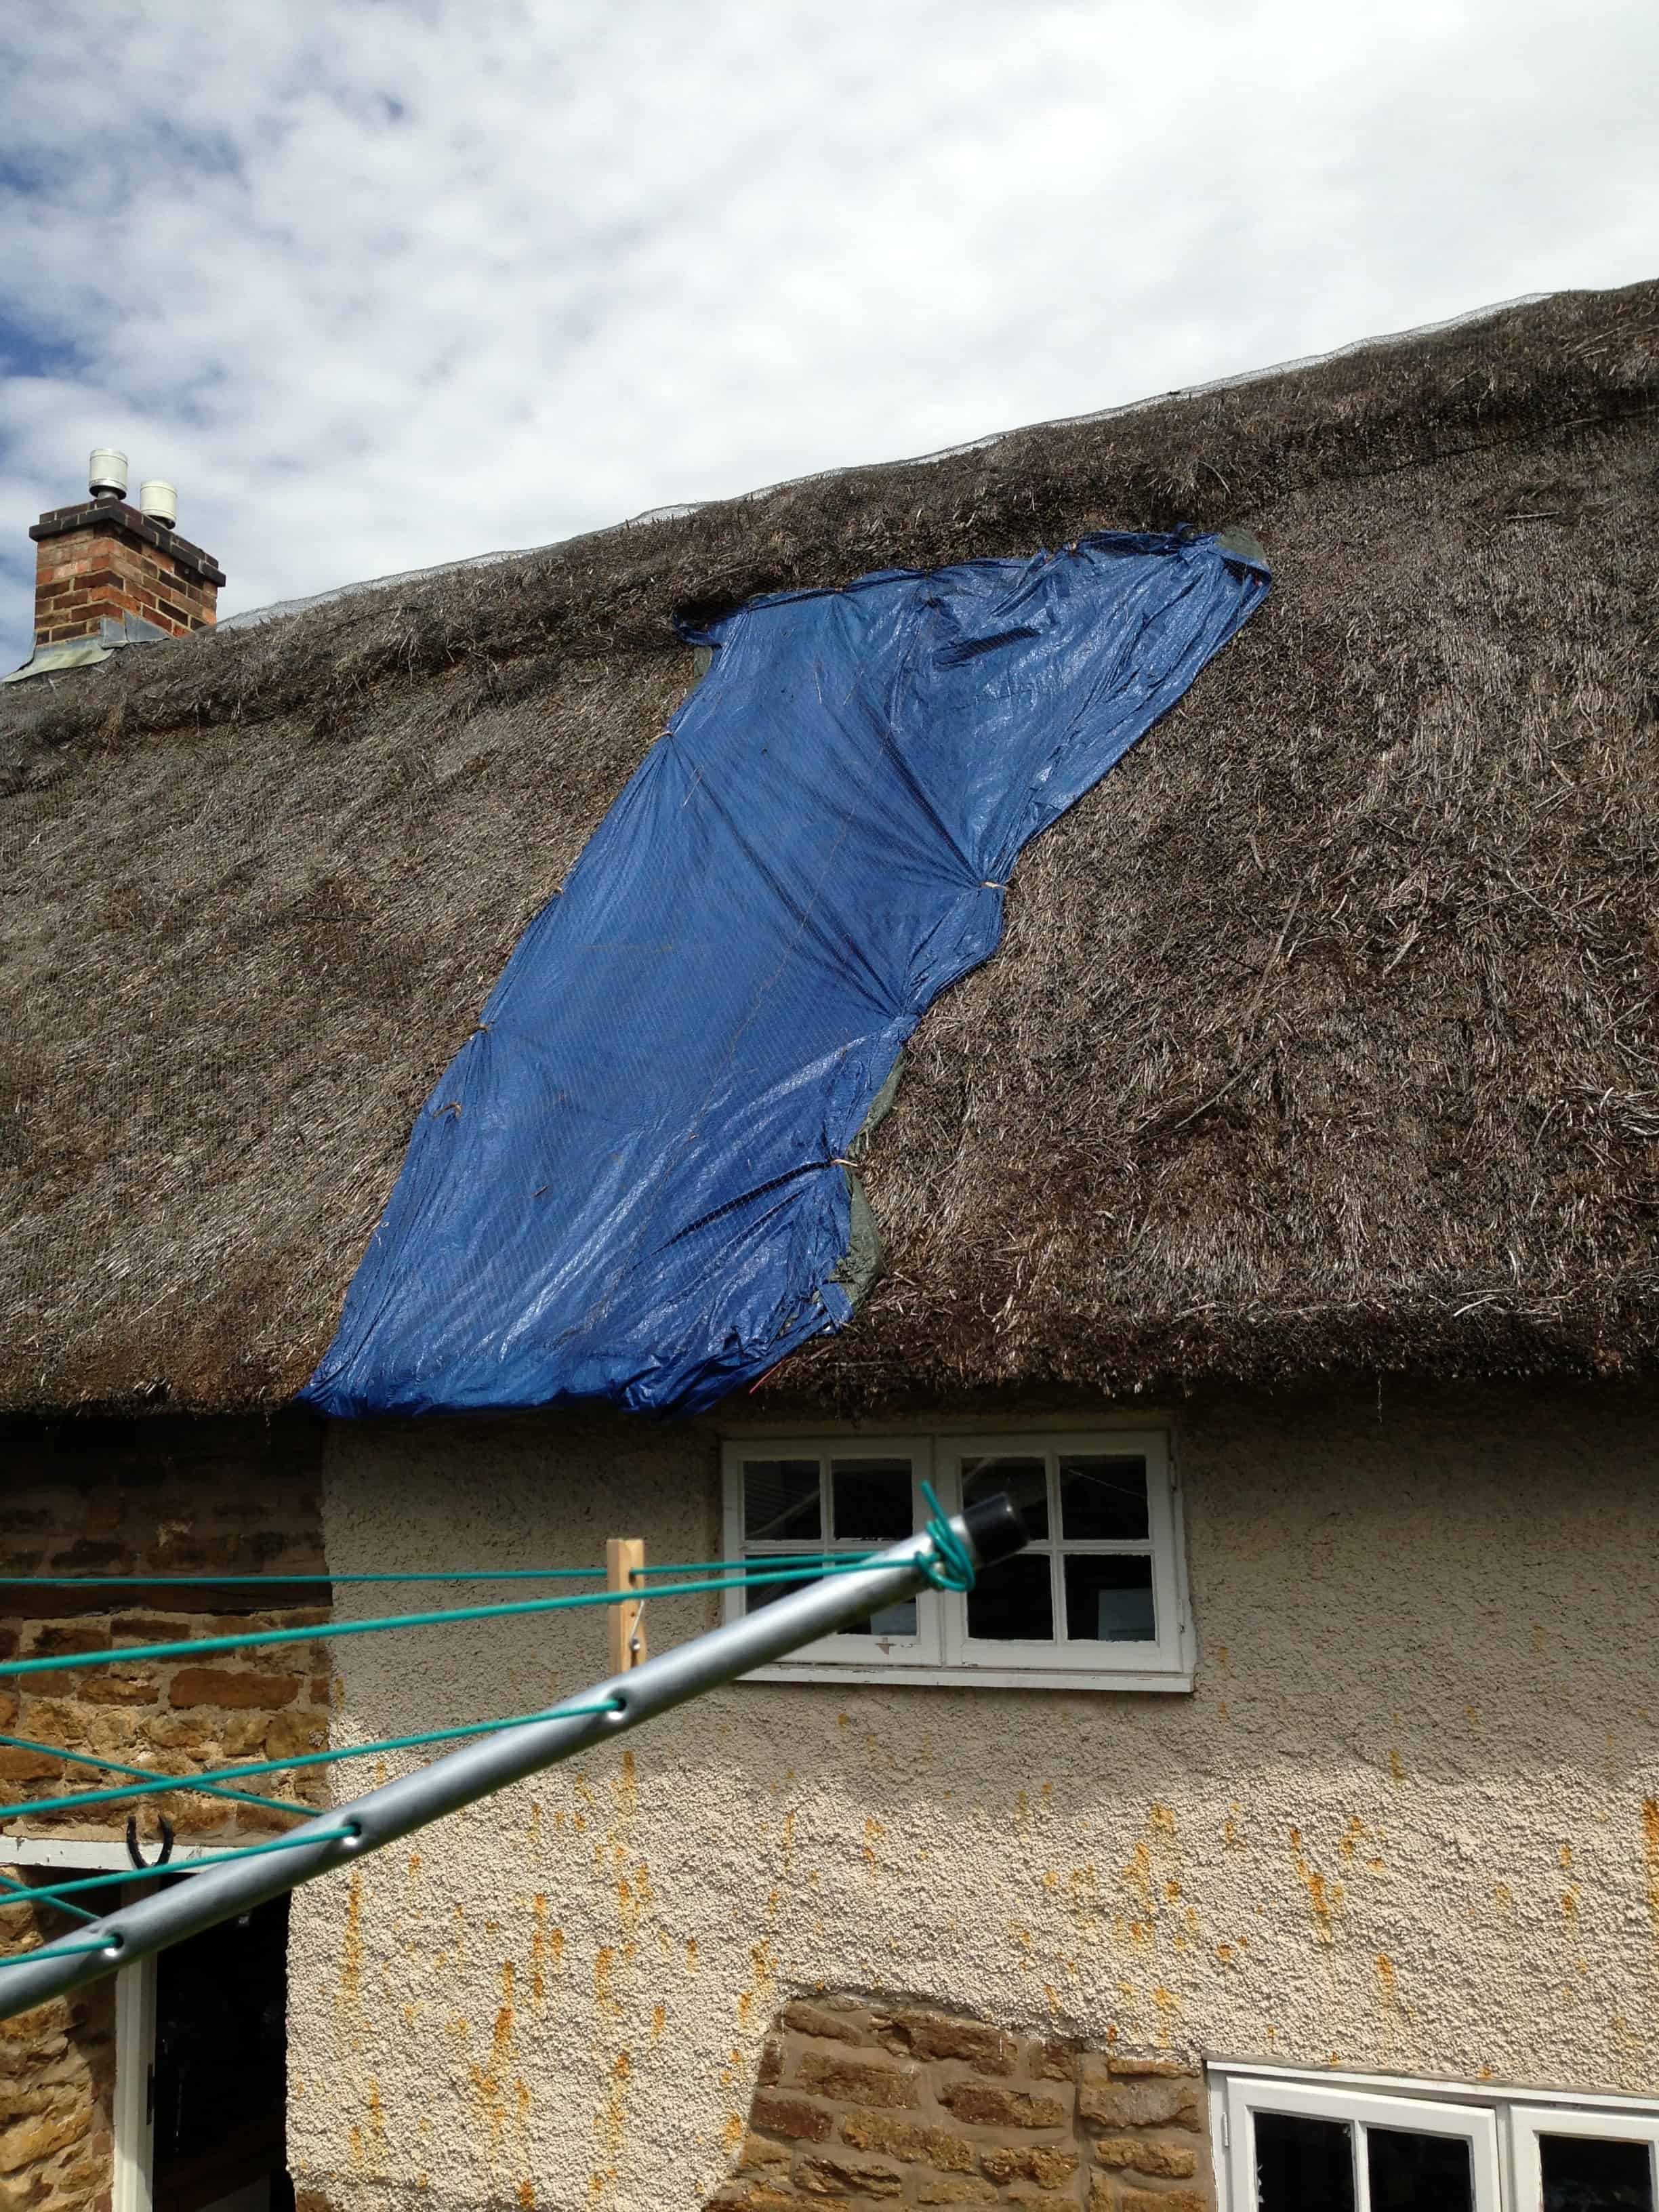 Do Thatched Roofs Leak?